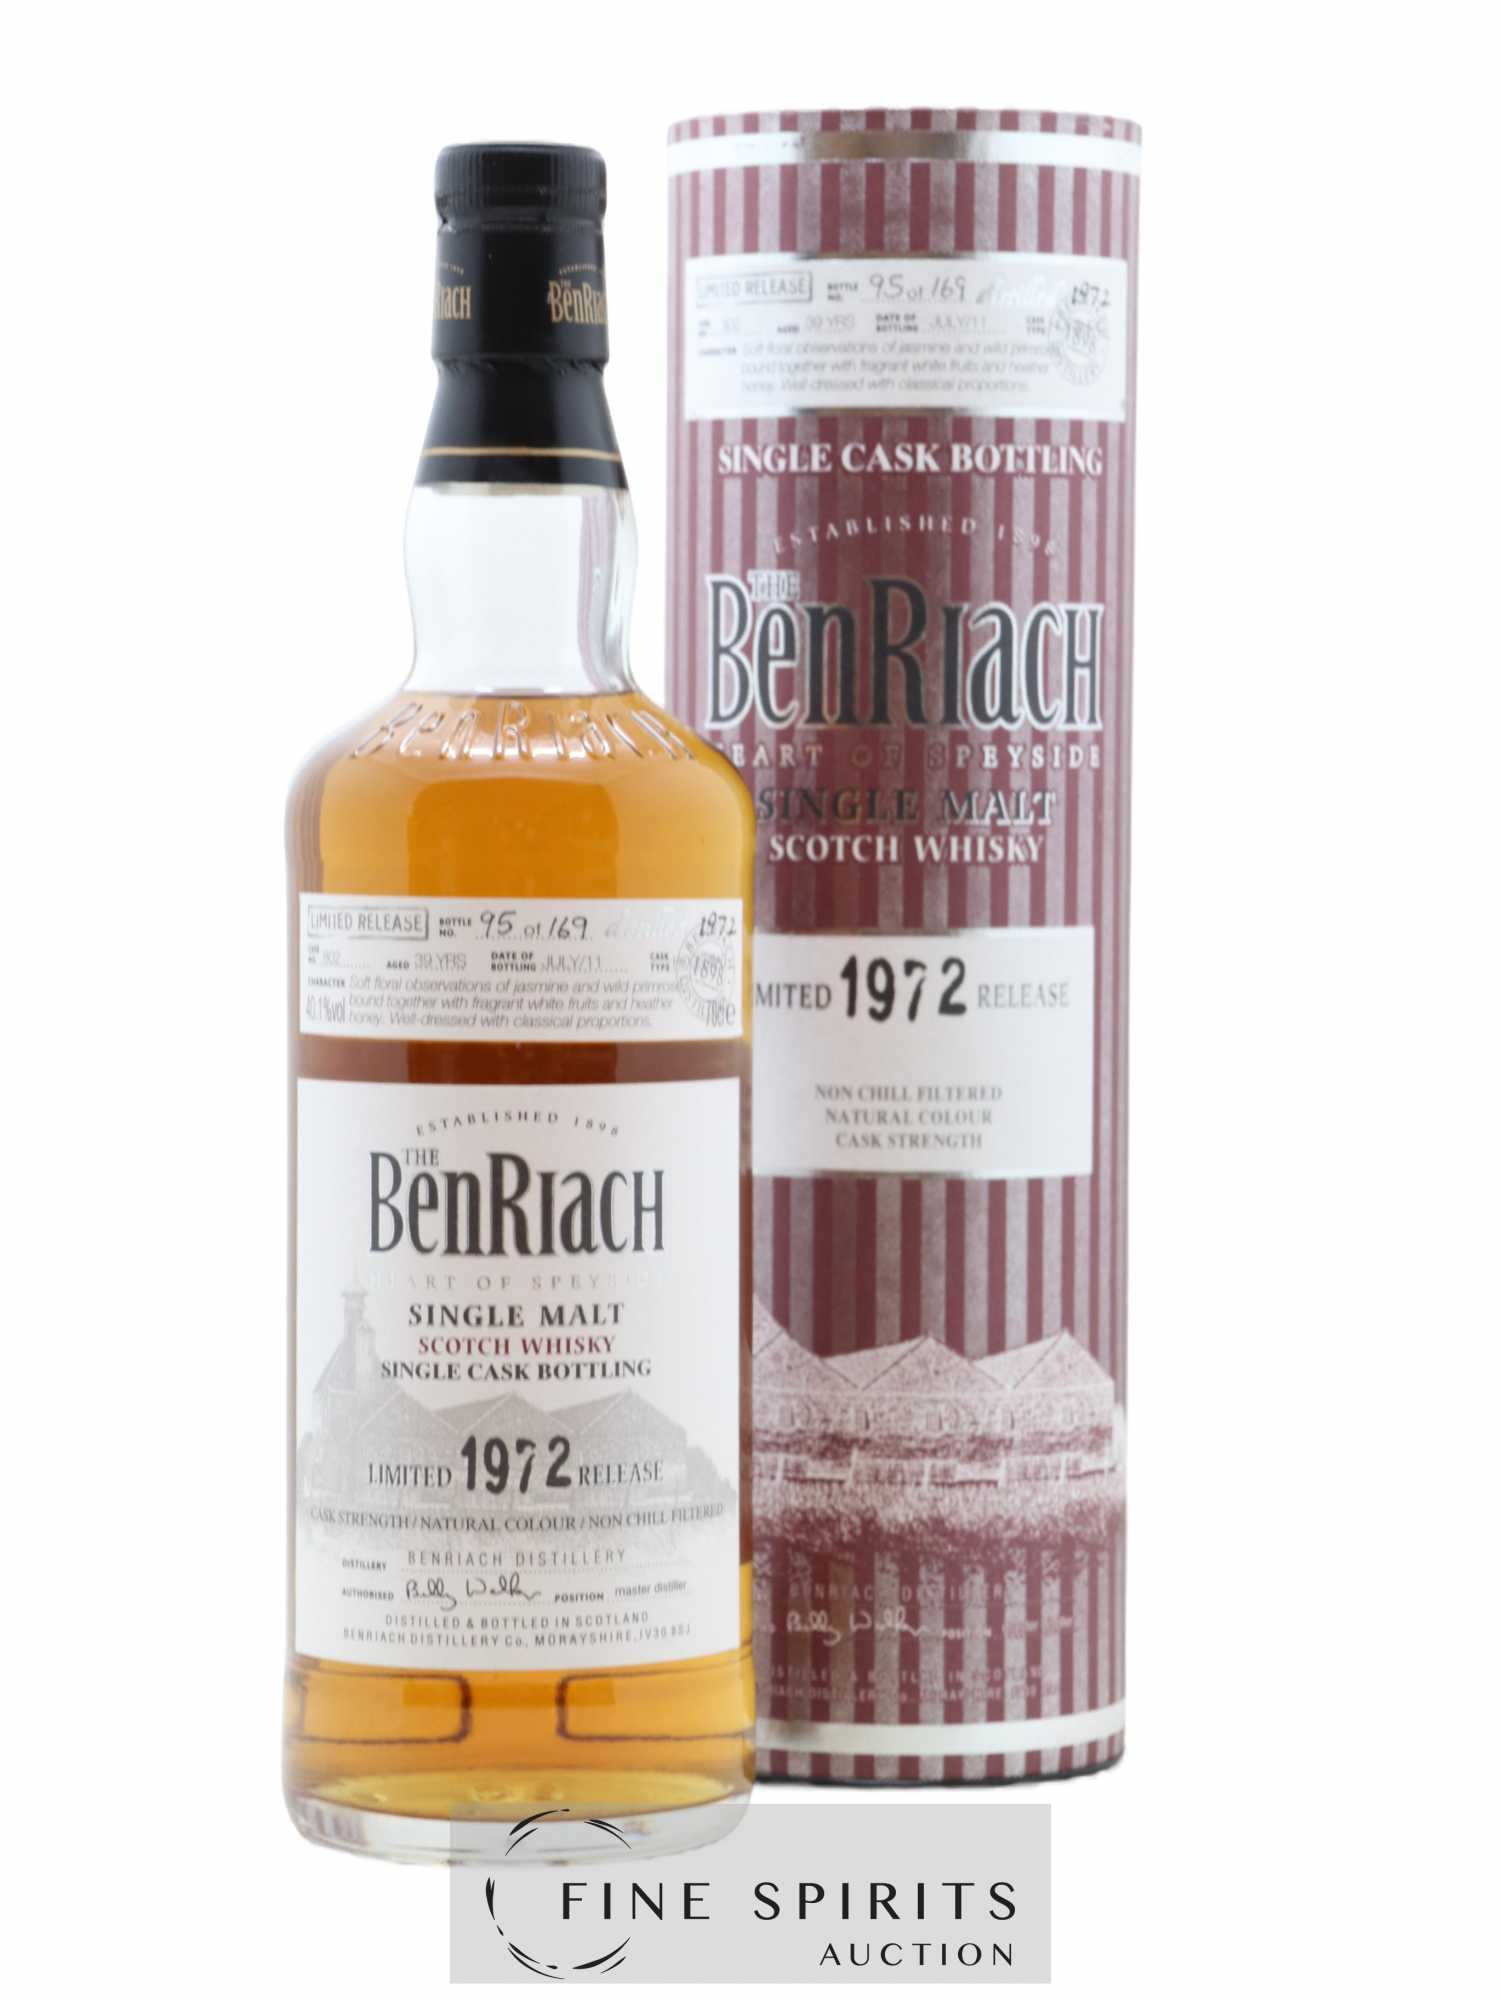 Benriach 39 years 1972 Of. Hogshead Cask n°802 - One of 169 - bottled 2011 Limited Release 